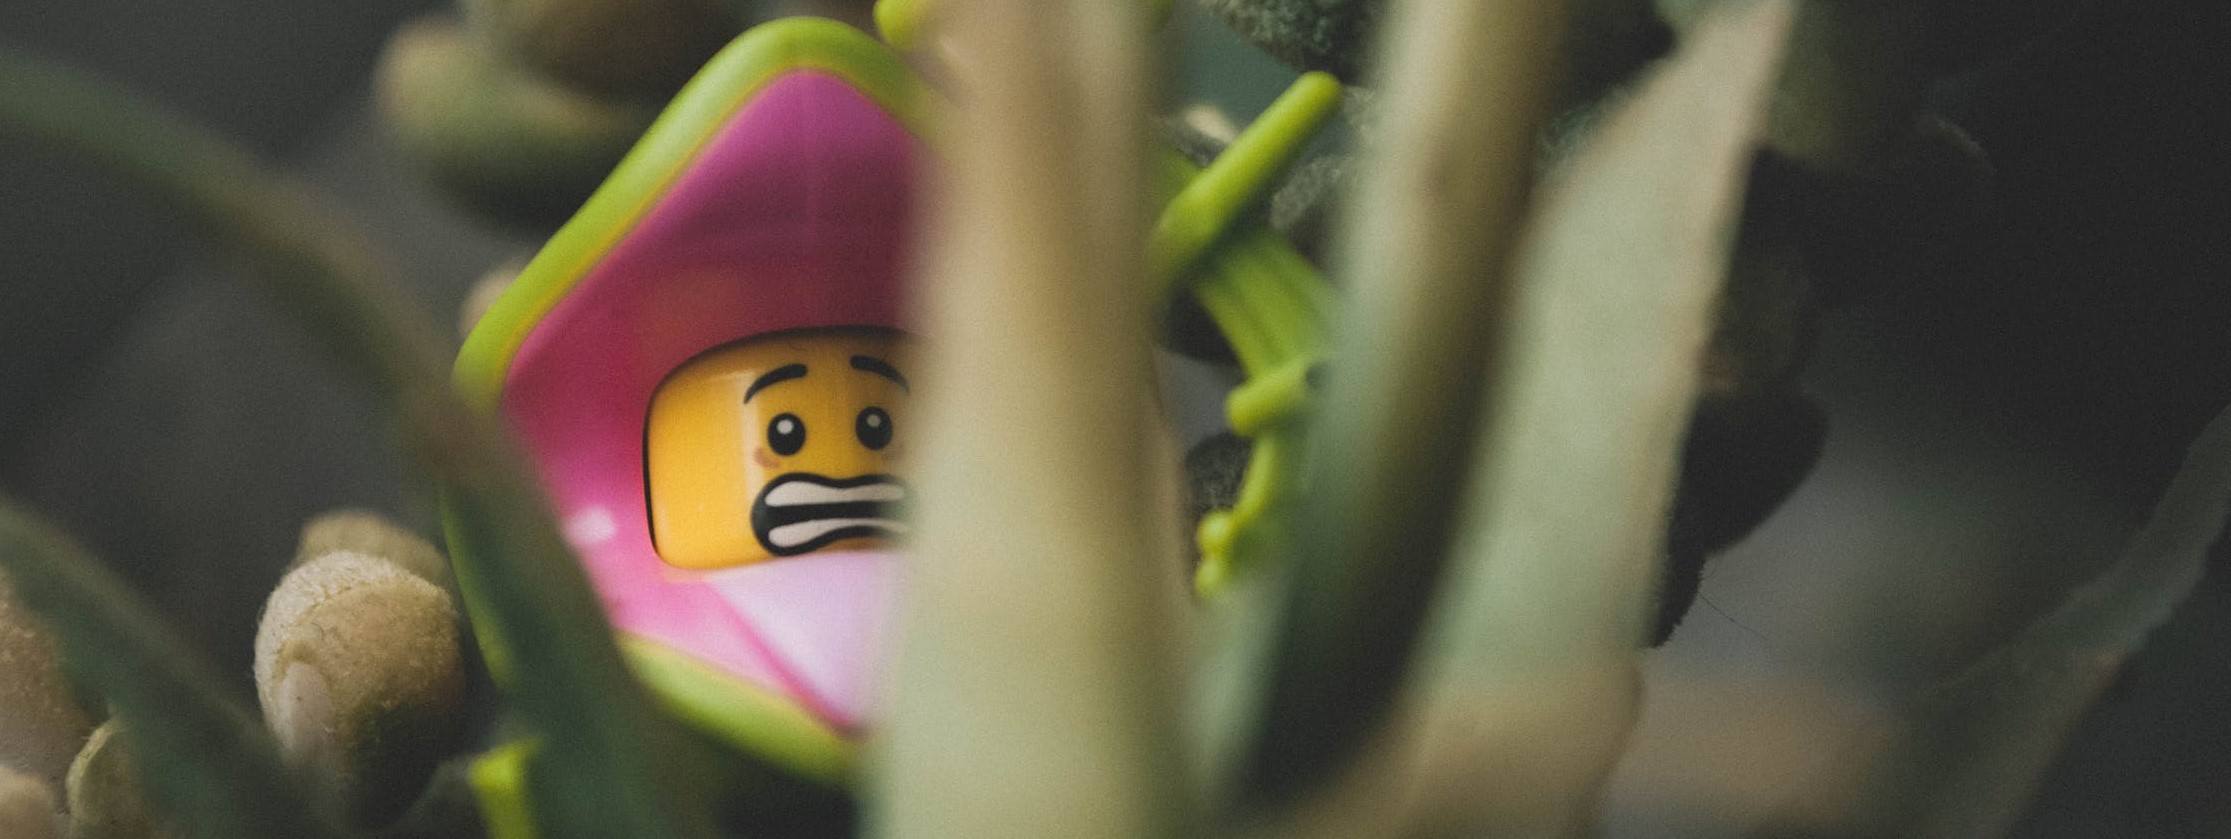 This LEGO looks worried, probably because he doesn't know what to eat.